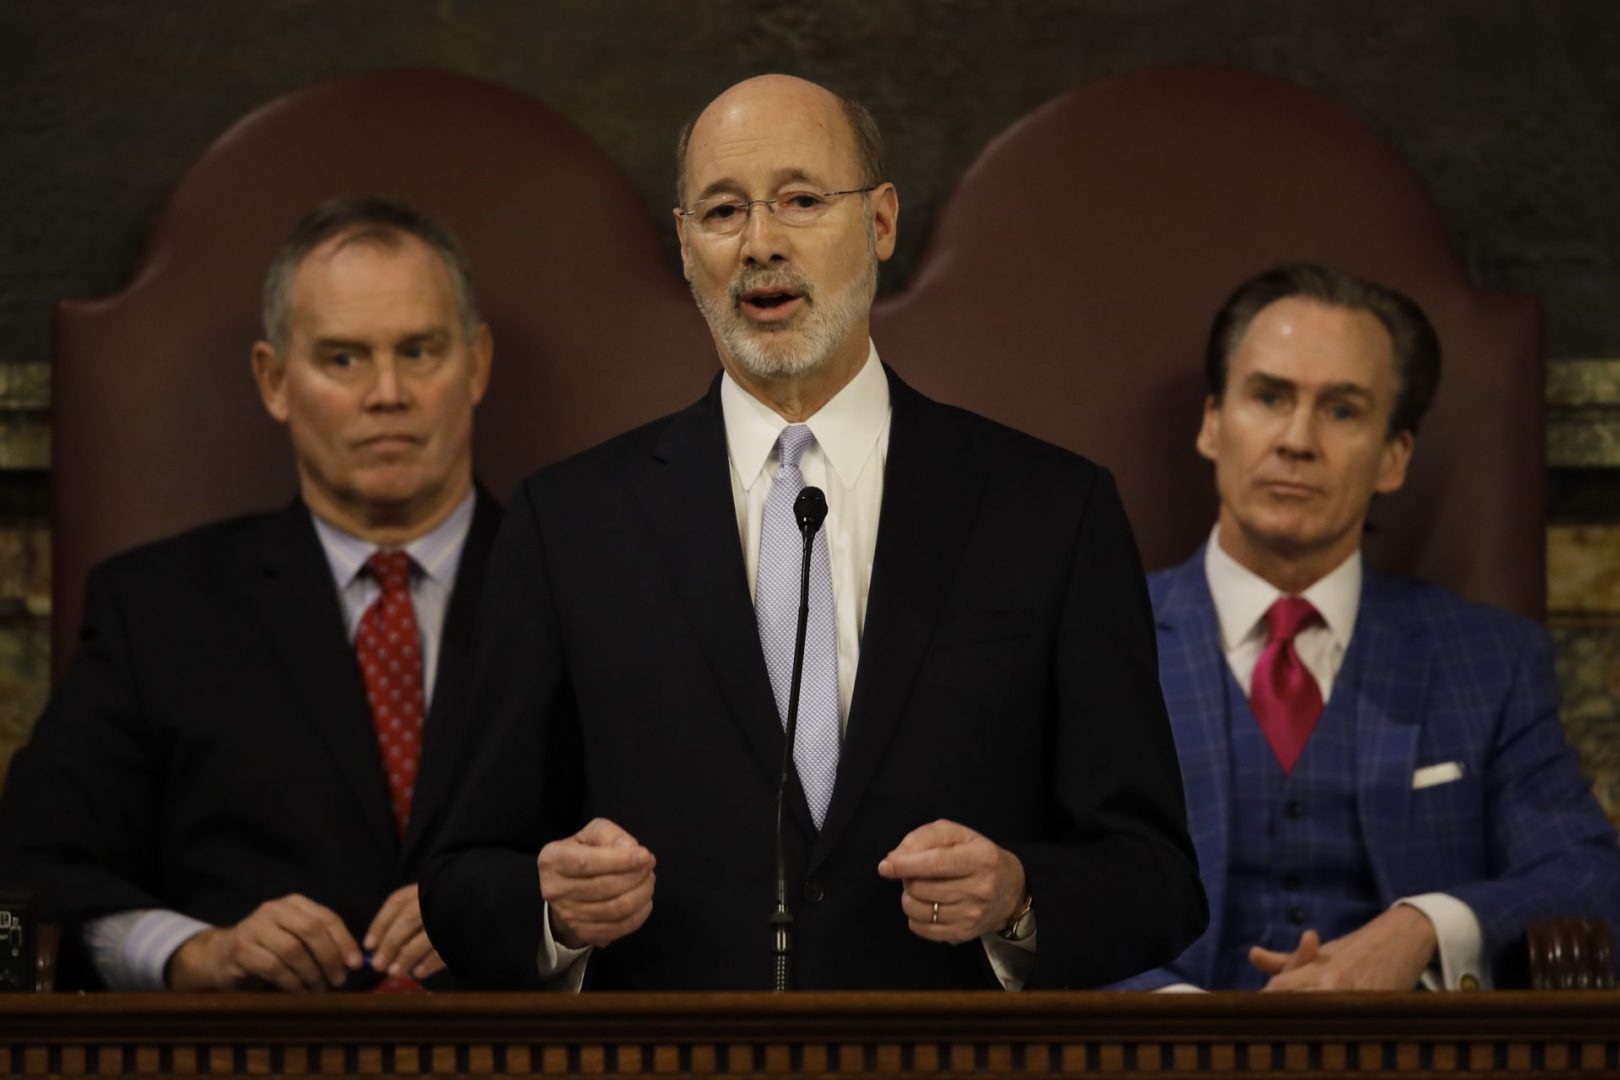 Gov. Tom Wolf delivers a previous budget address to a joint session of the Pennsylvania House and Senate. Former Speaker of the House of Representatives, Rep. Mike Turzai, R-Allegheny, is at left, and former Lt. Gov. Michael Stack is at right.